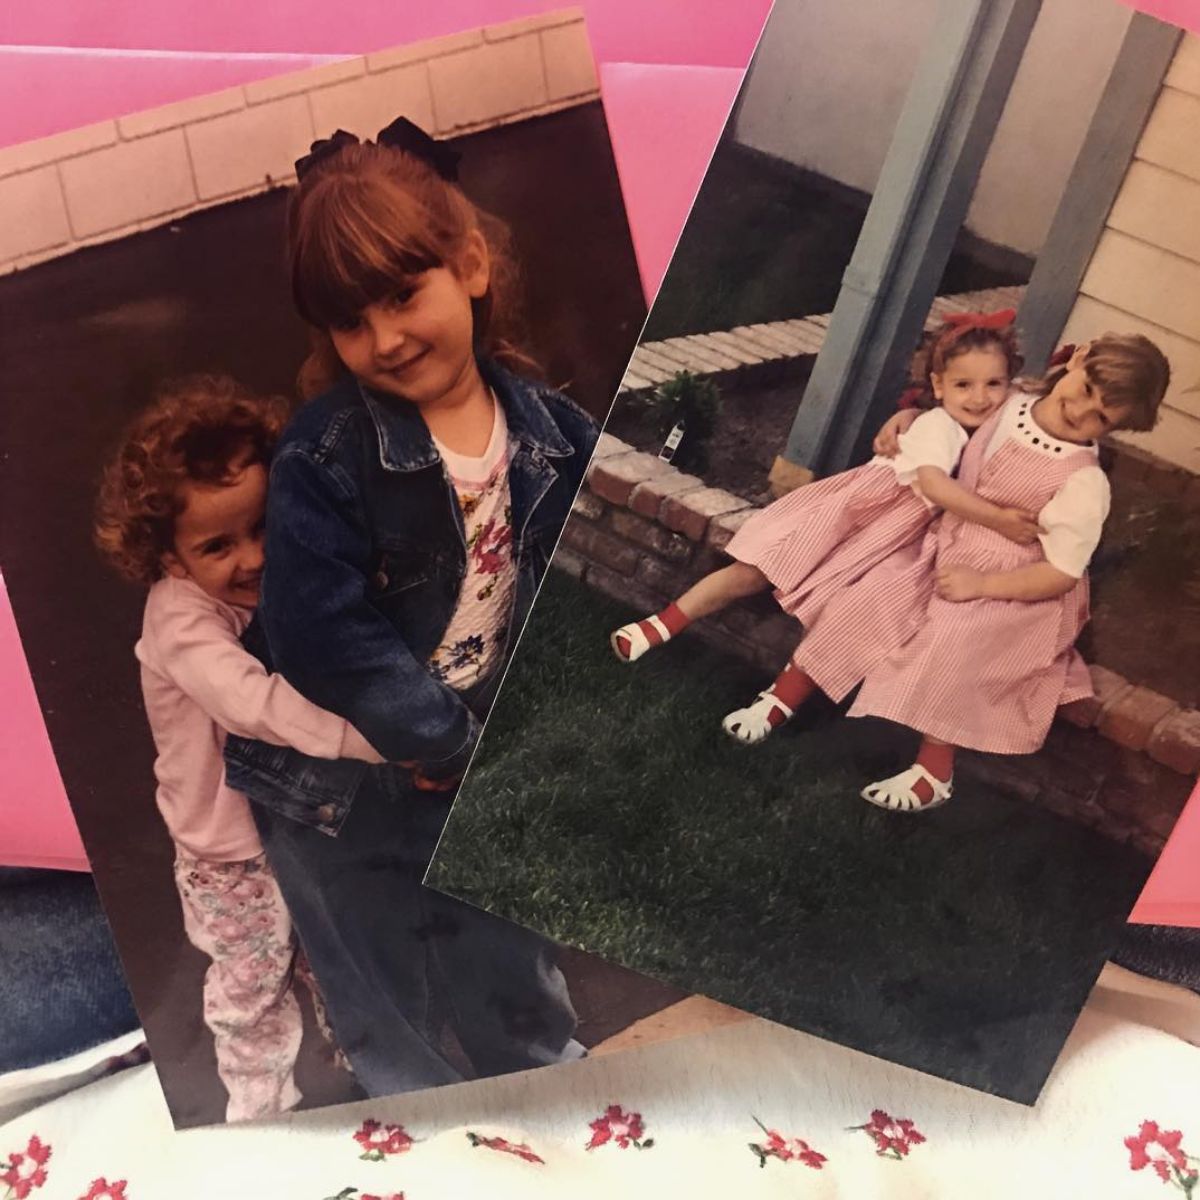 Childhood photo of Keleigh Sperry and her sister.